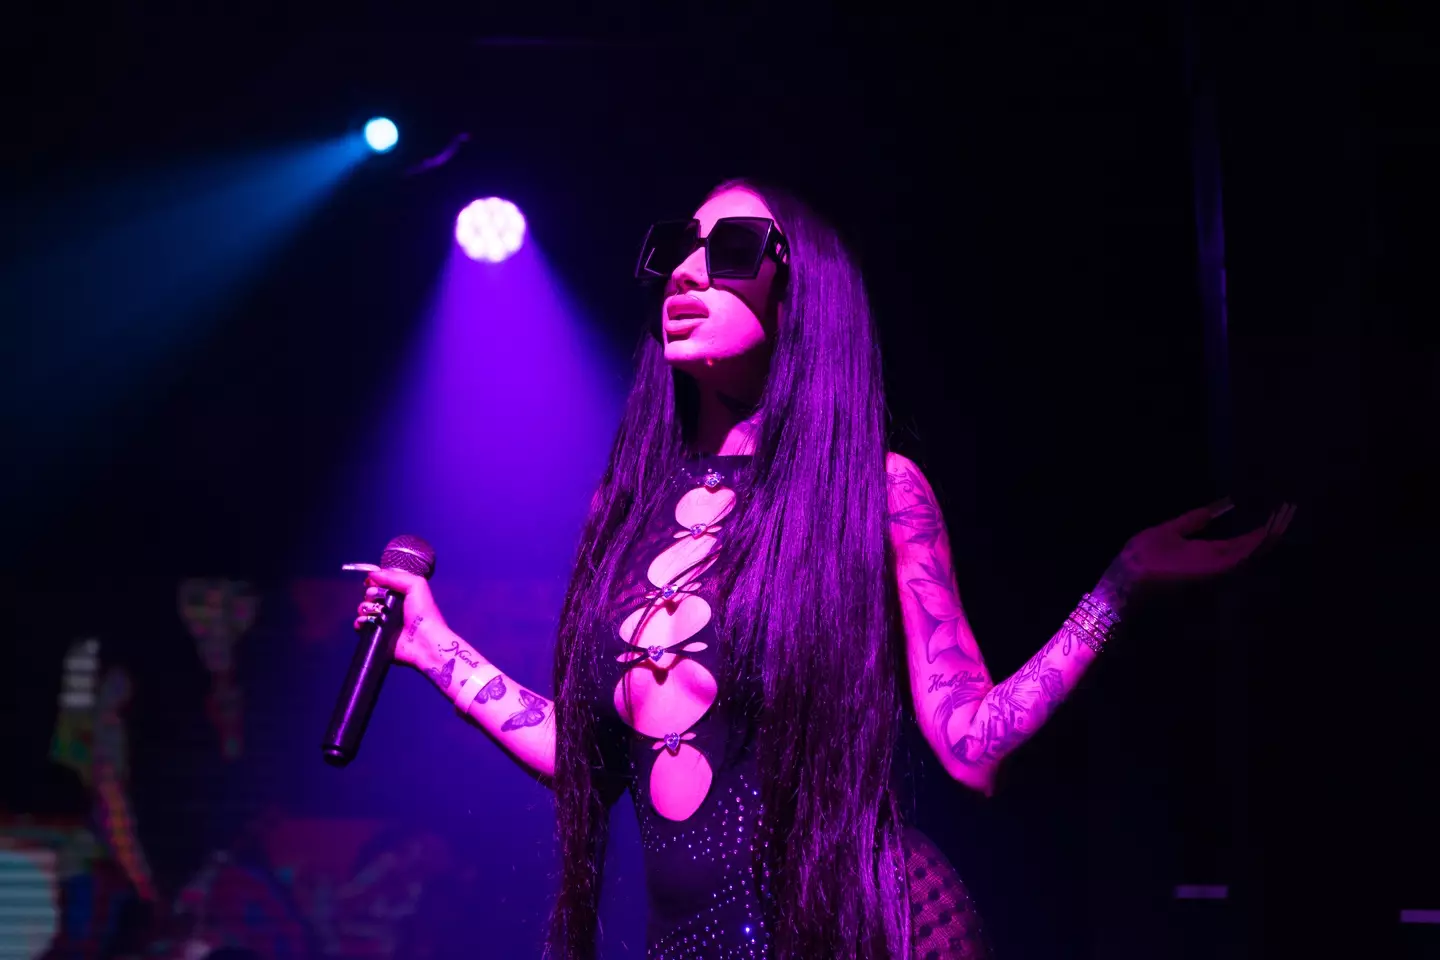 The rapper revealed how much she made on OnlyFans.